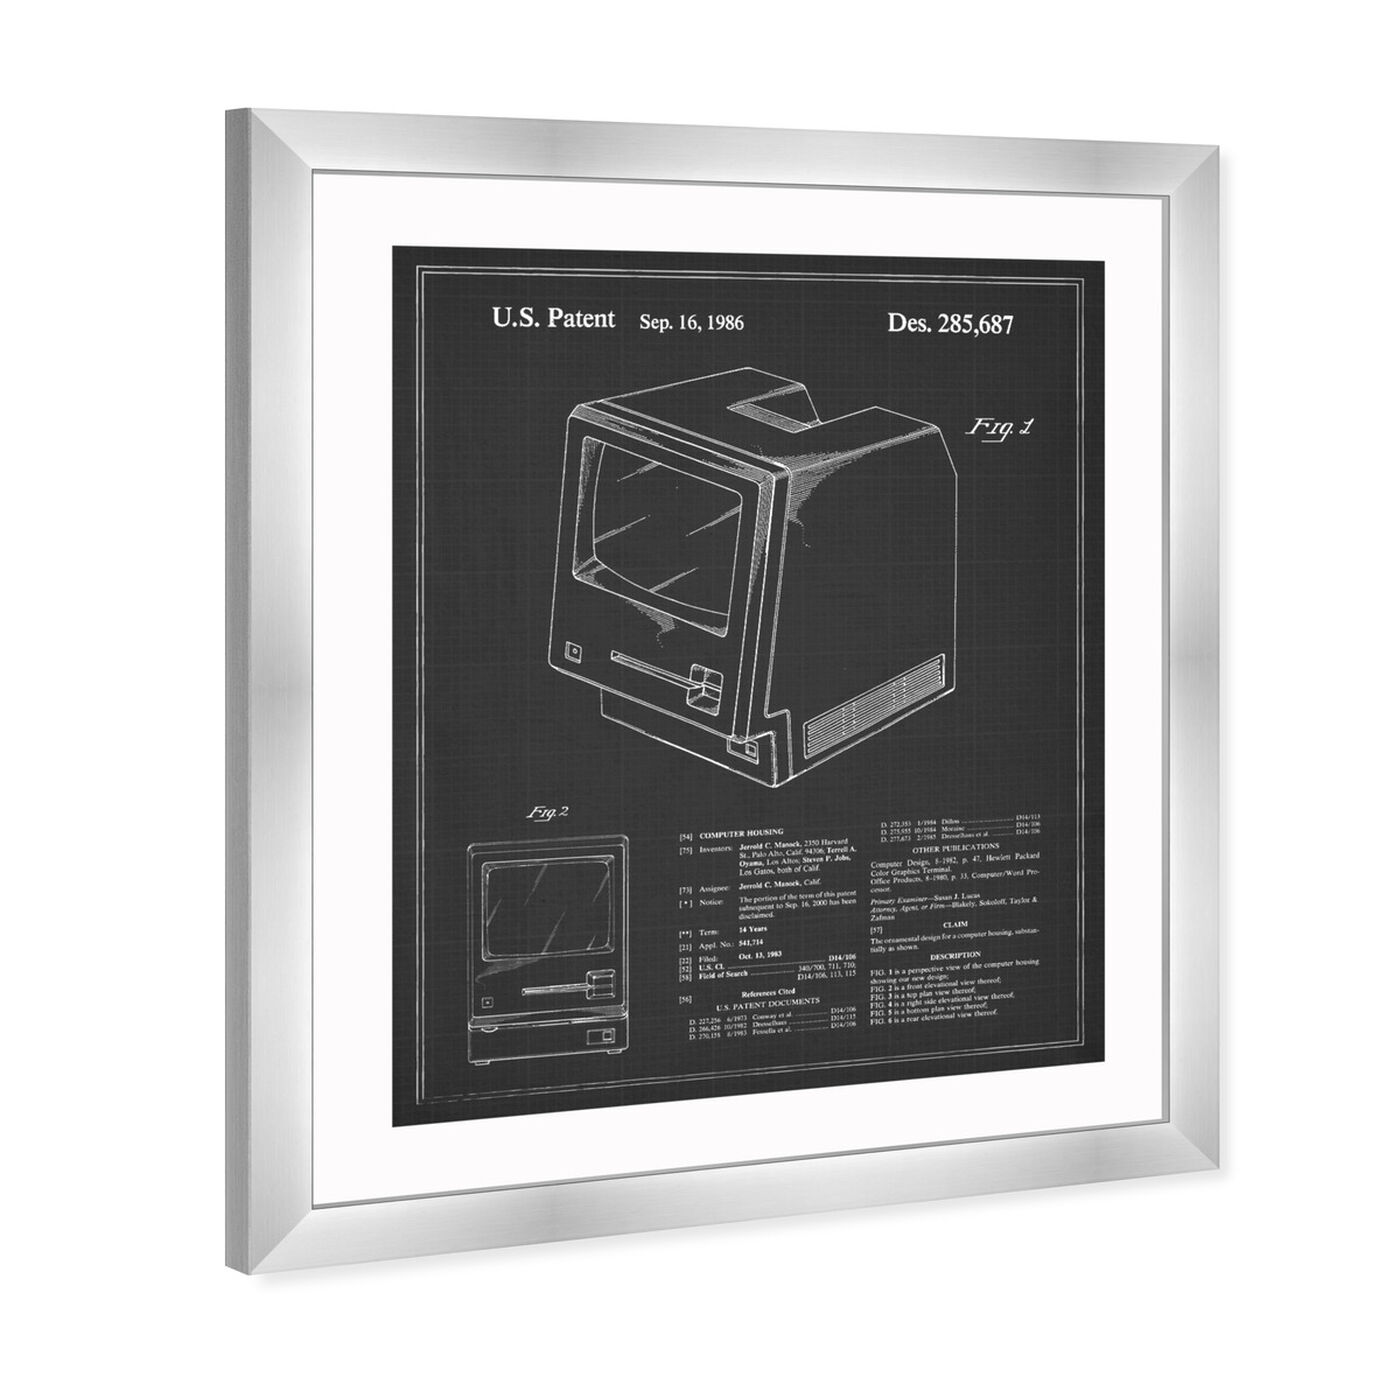 Angled view of Apple Macintosh 128K 1986 - Noir I featuring entertainment and hobbies and computer art.